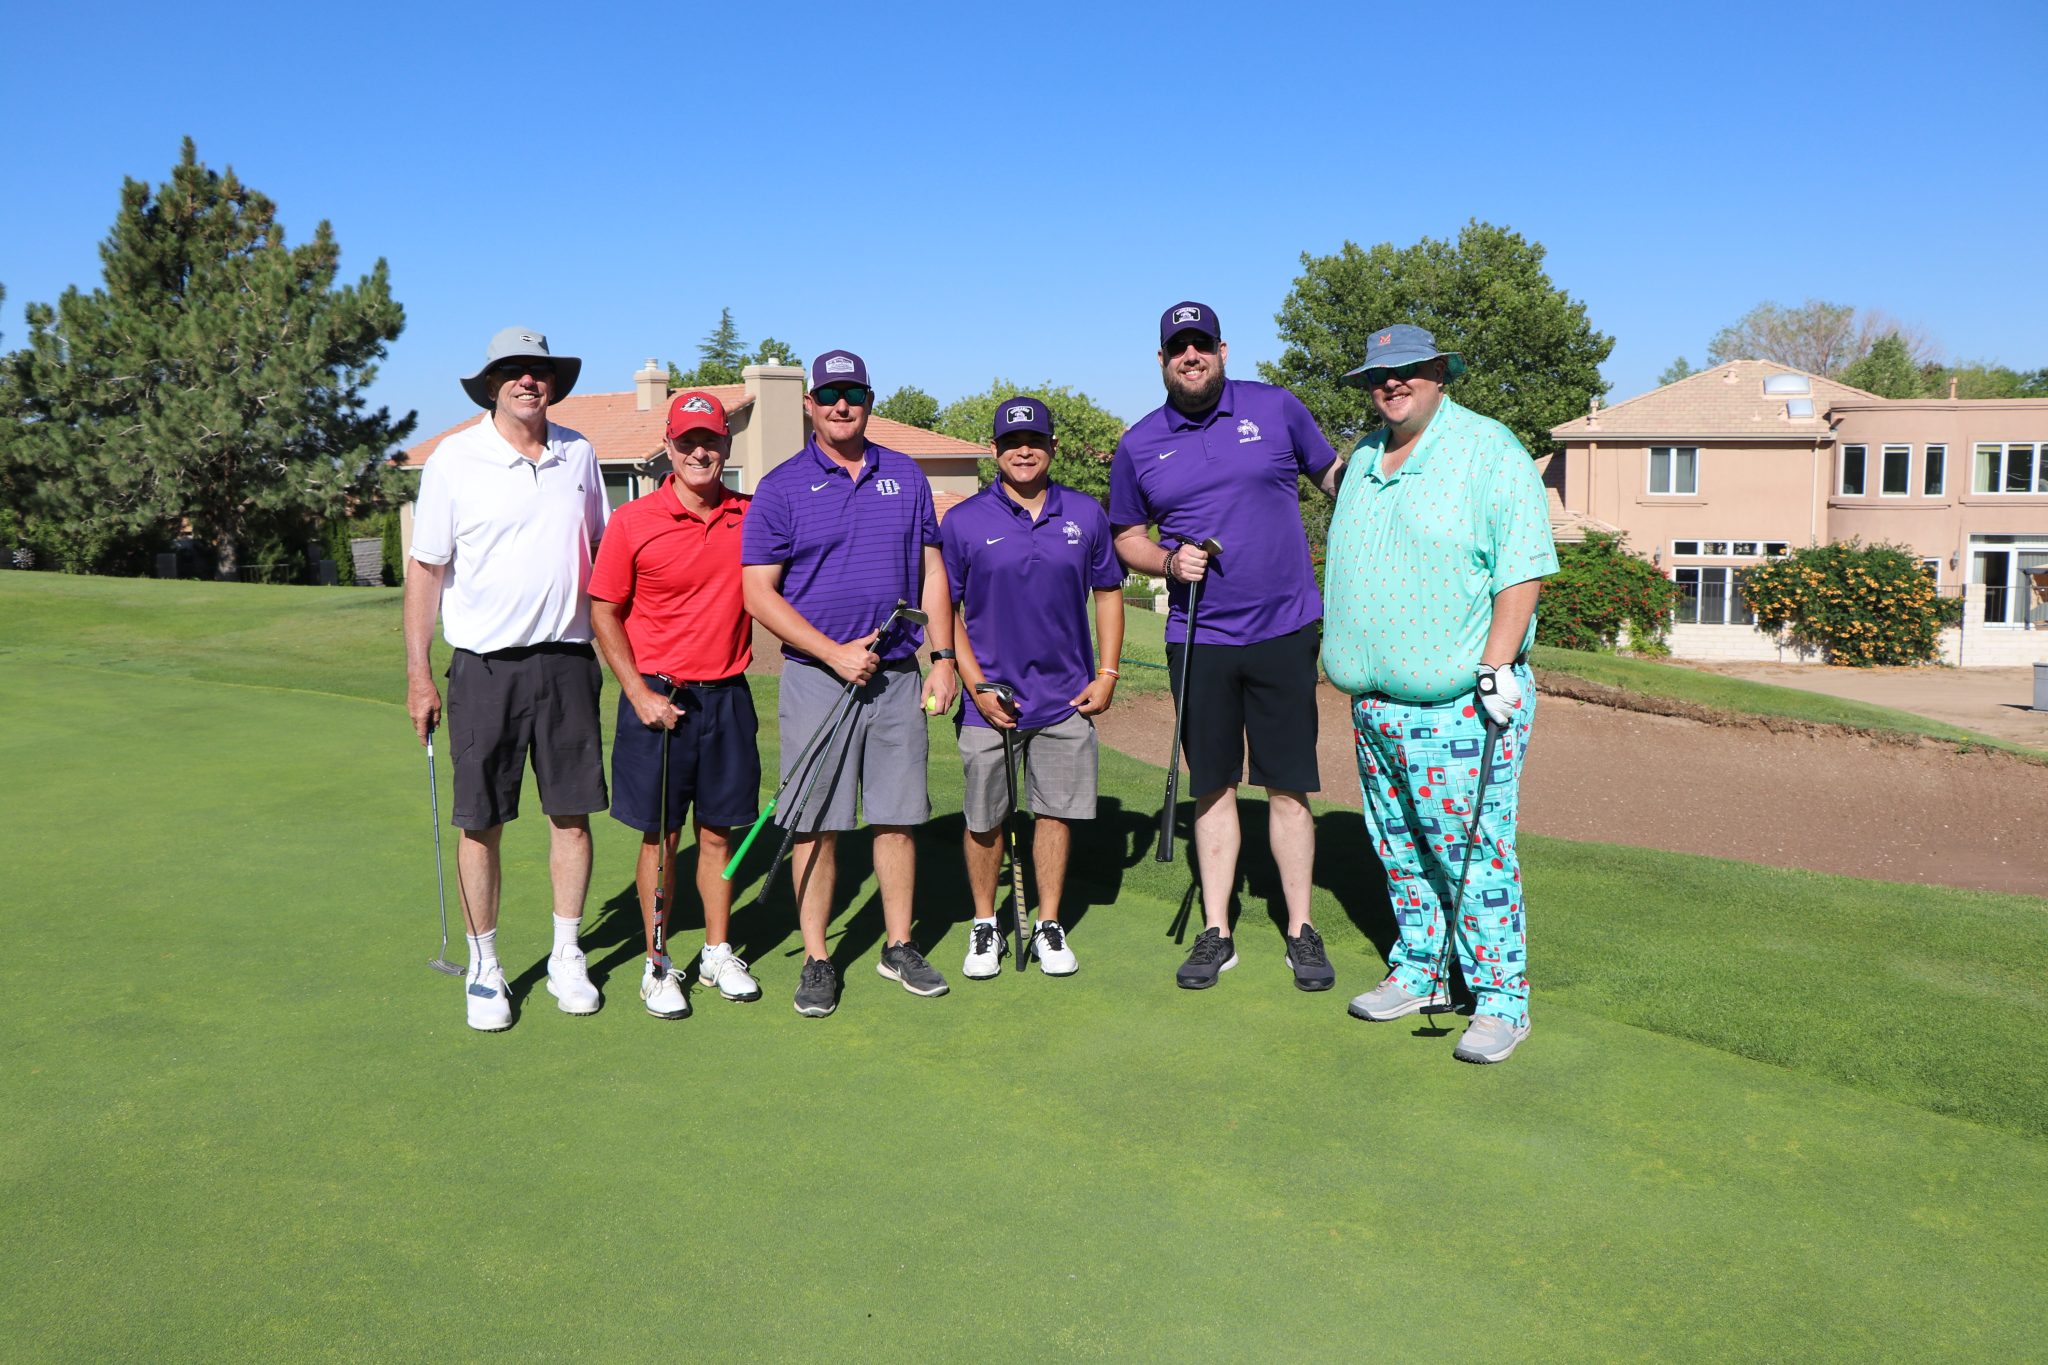 NMAA FOUNDATION GOLF CLASSIC RAISES THOUSANDS OF DOLLARS FOR NEW MEXICO